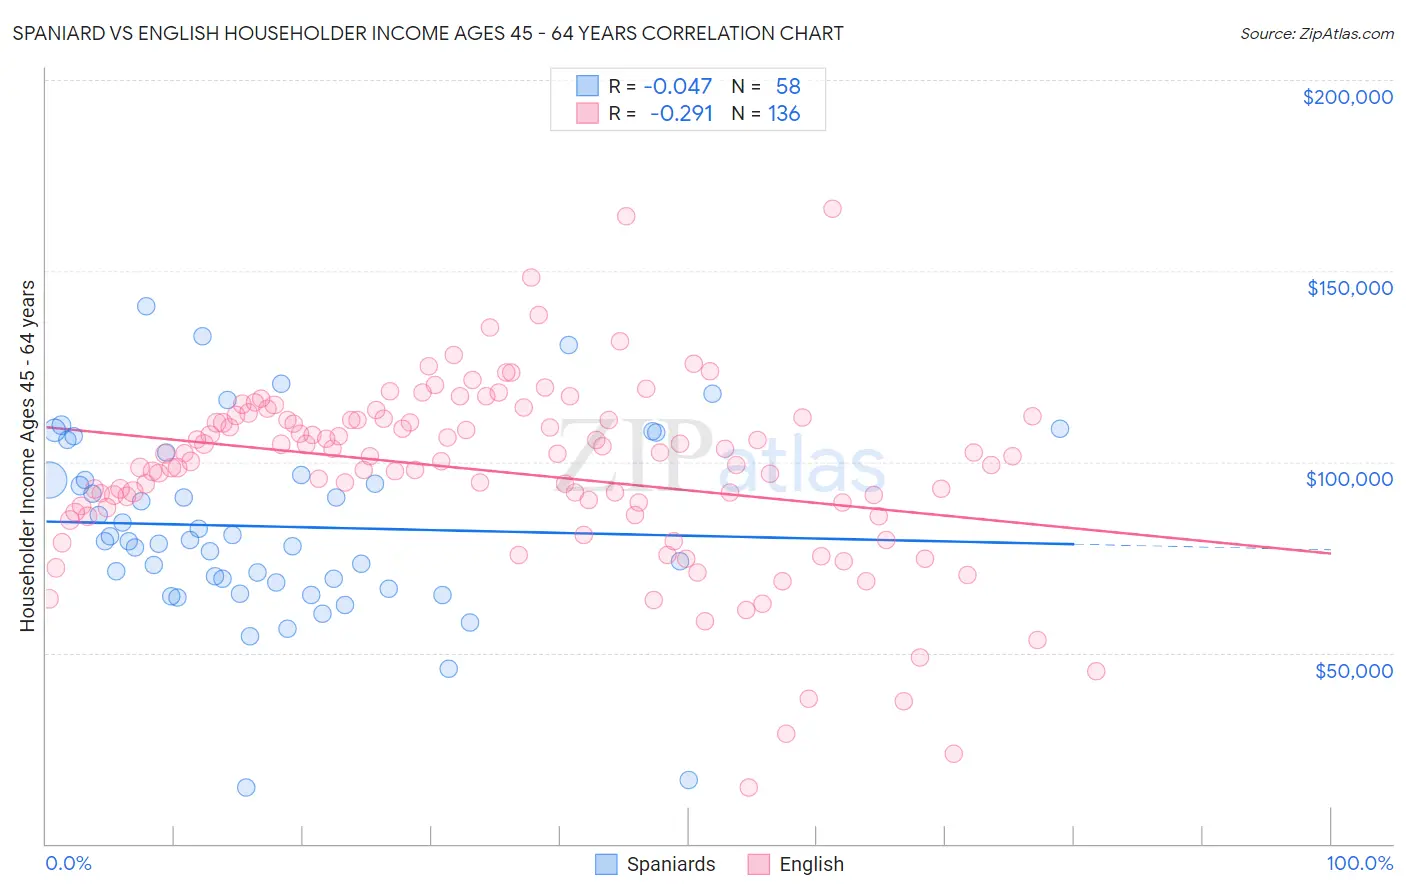 Spaniard vs English Householder Income Ages 45 - 64 years